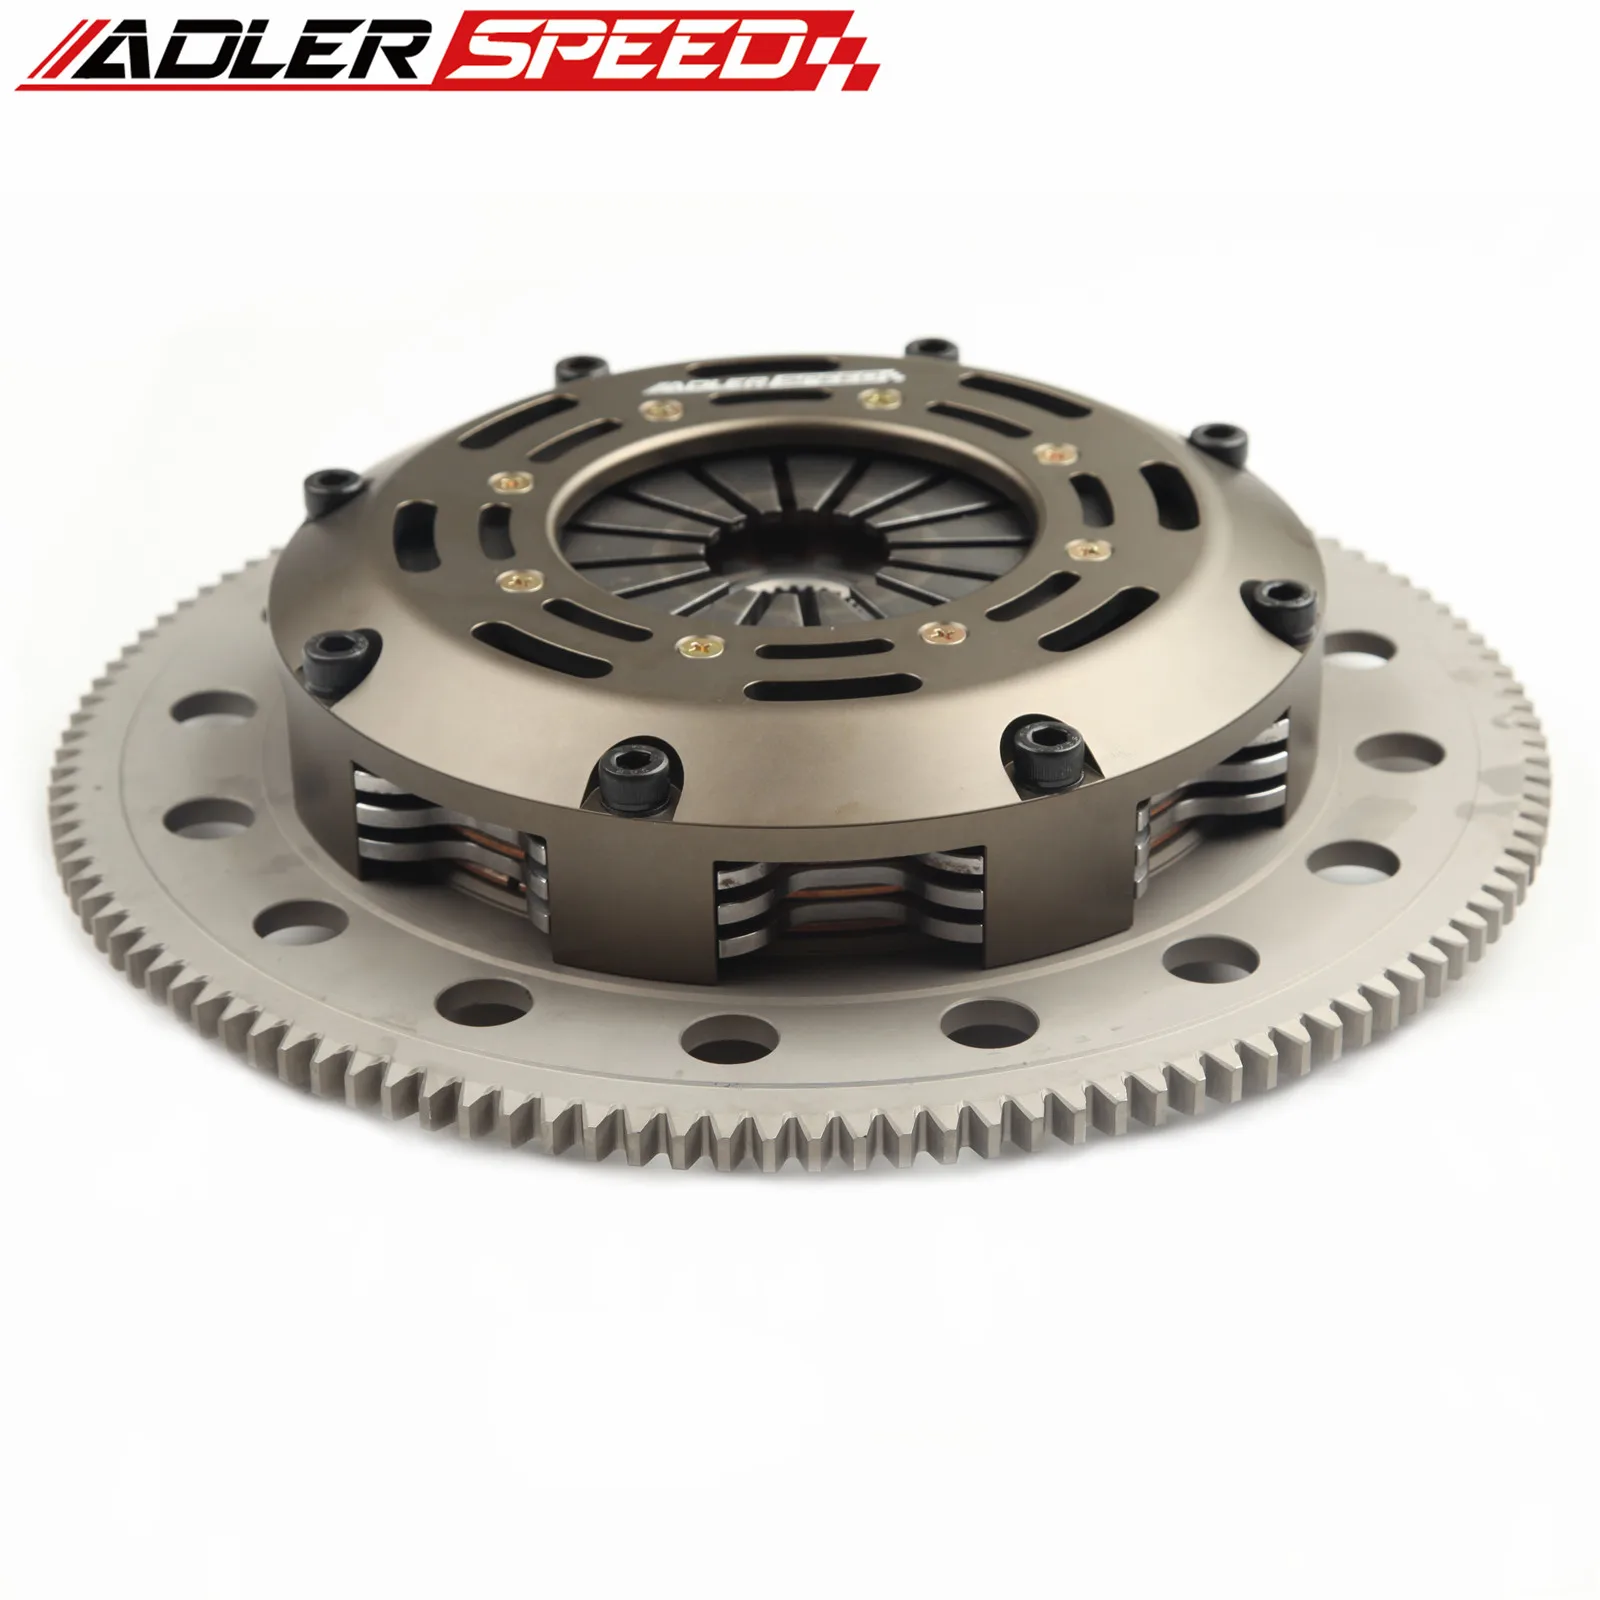 

ADLERSPEED Racing /Street Clutch Twin/Triple Disc Kit For HONDA ACCORD PRELUDE FOR Acura CL 2.2L, 2.3L H22 H23 F22 F23